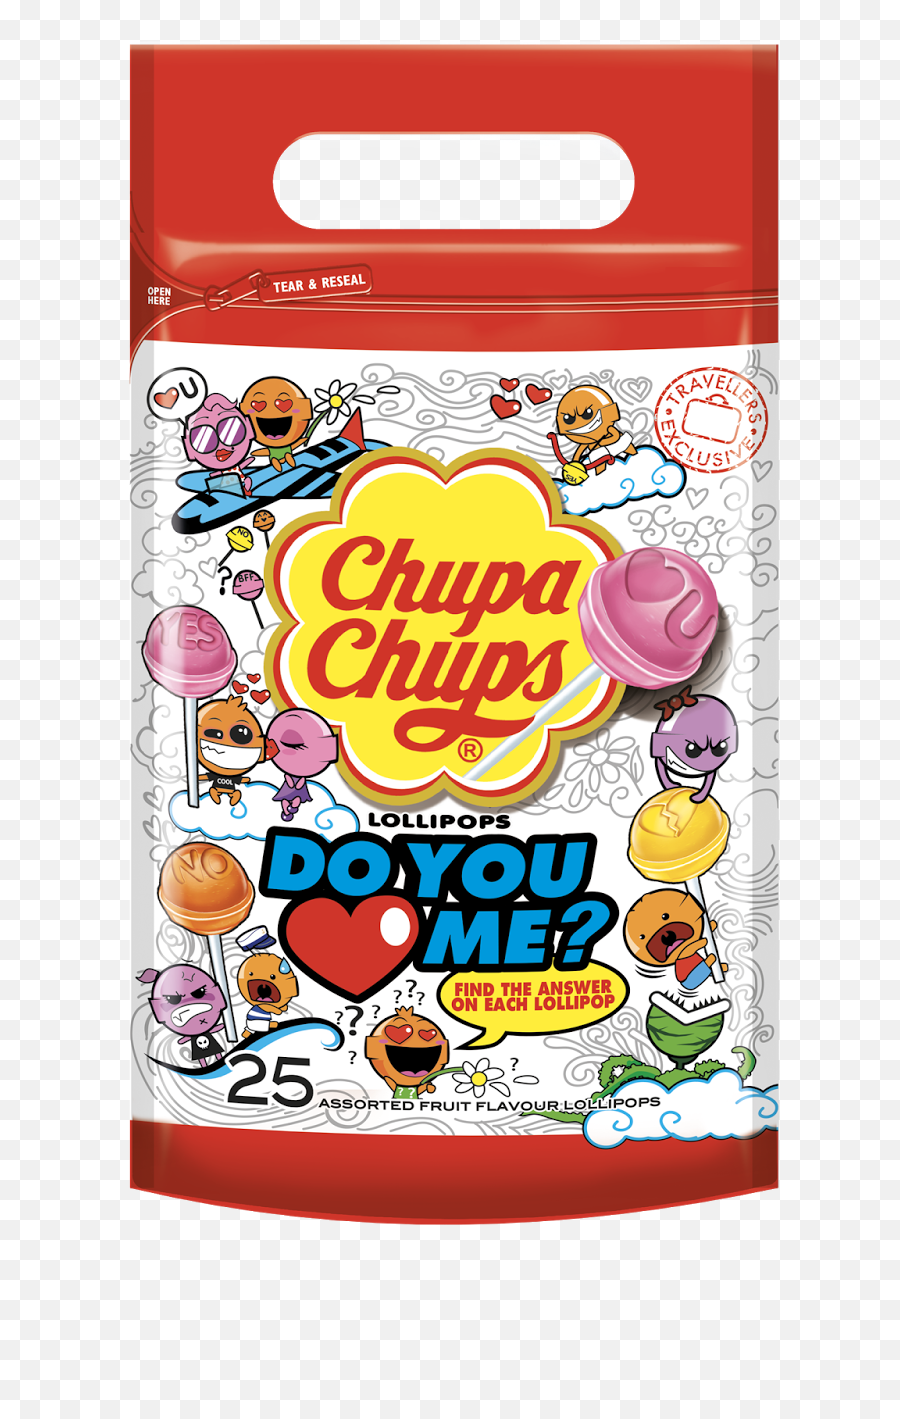 Essential Communications Connect With Mentos U0026 Express - Chupa Chups Do You Love Me Emoji,New Year's Love Emoticons